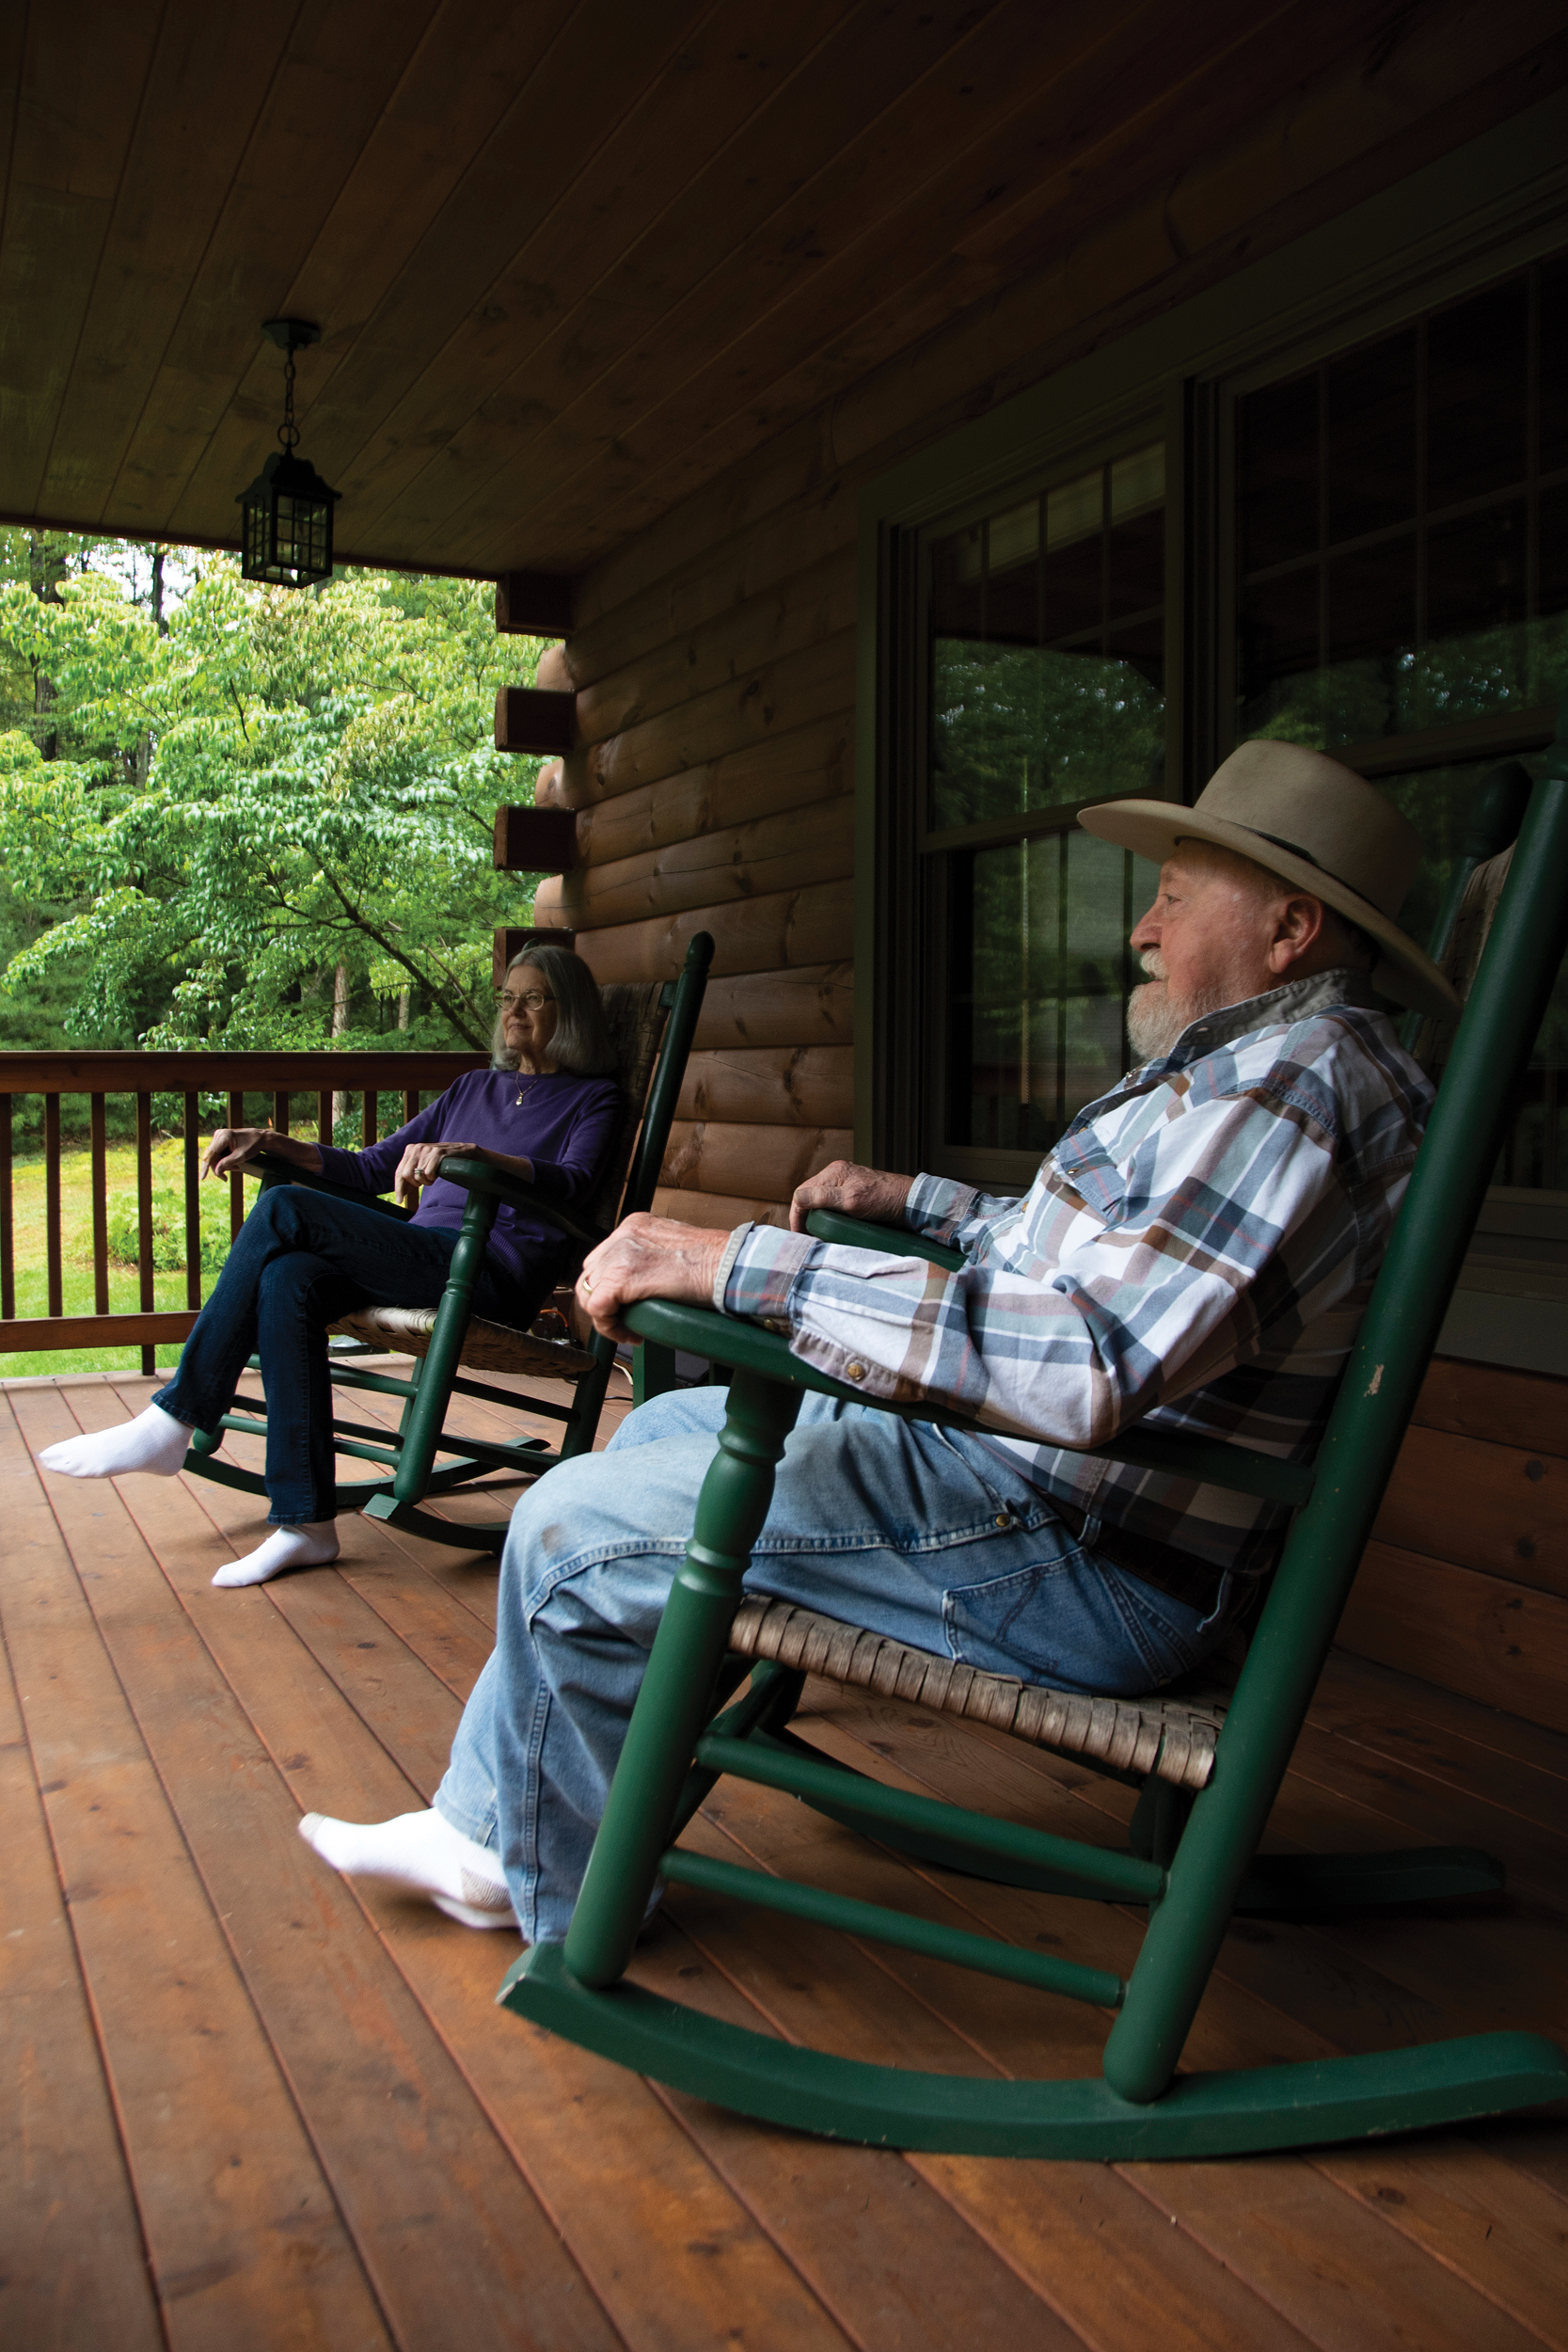 Ray and Debbie Slothour, members and former employees of Gettysburg-based Adams EC, enjoy the front porch of their log home in Orrtanna.